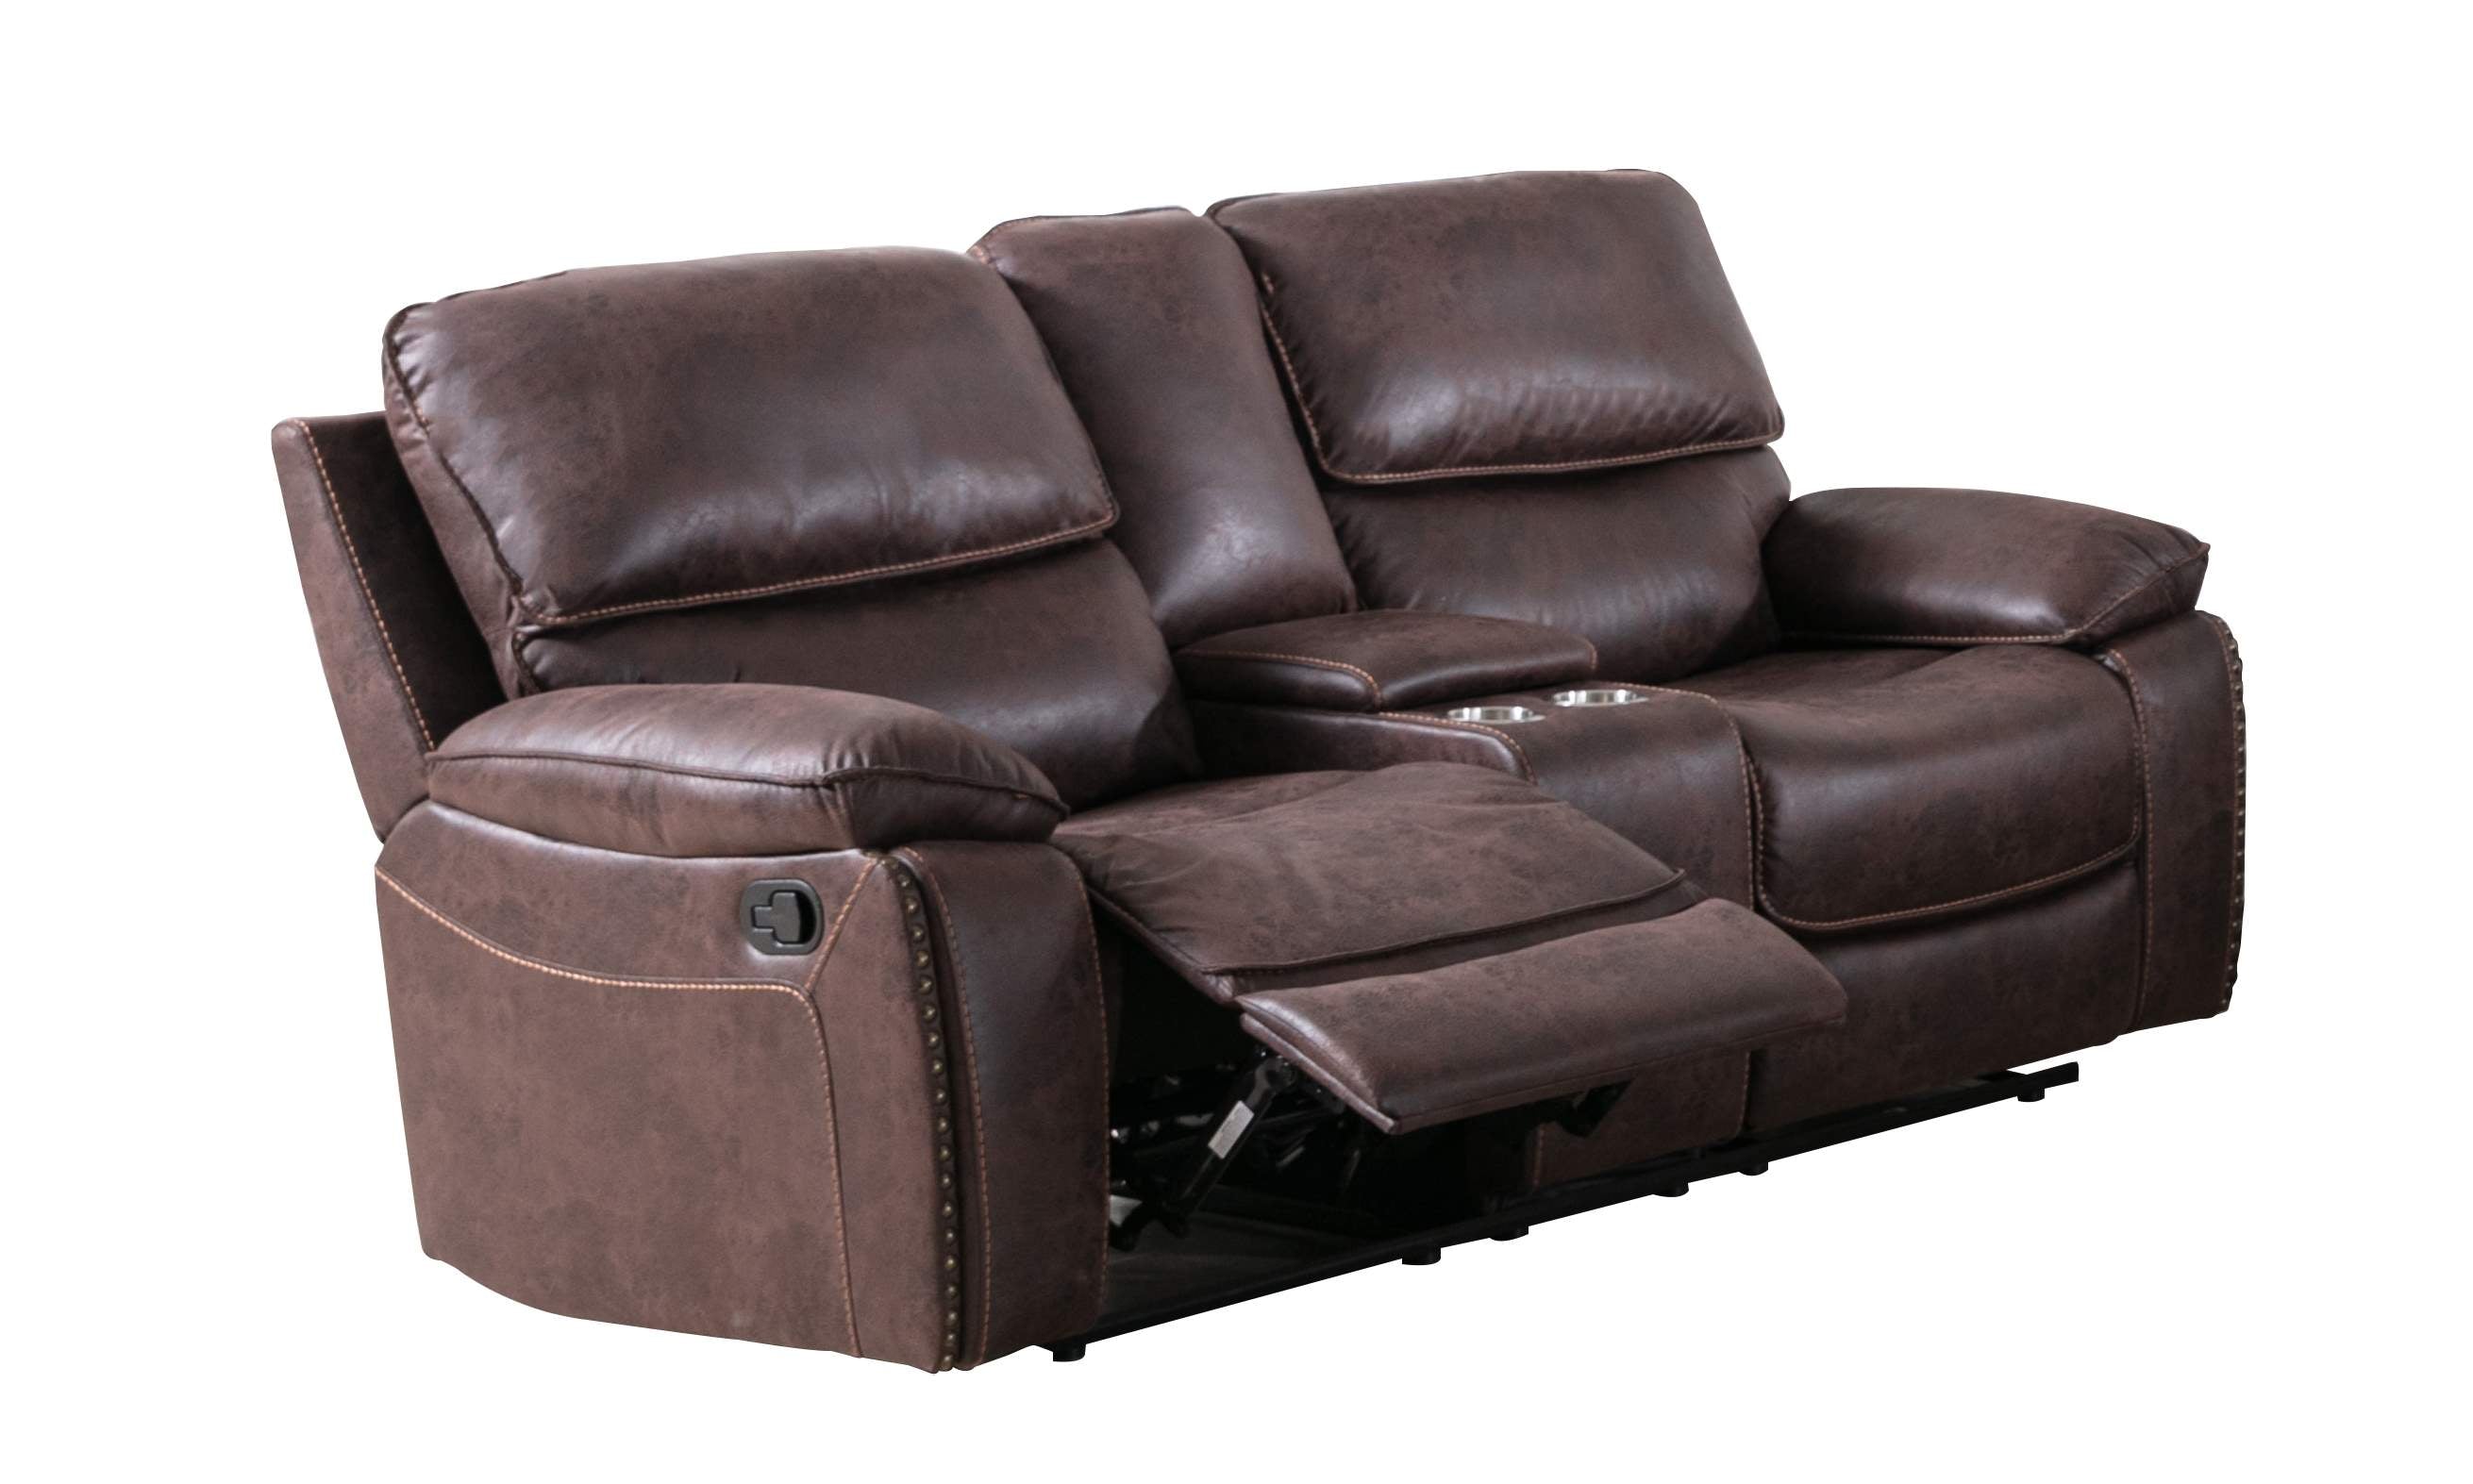 Kincaide Reclining Sofa Collection Brown 99934